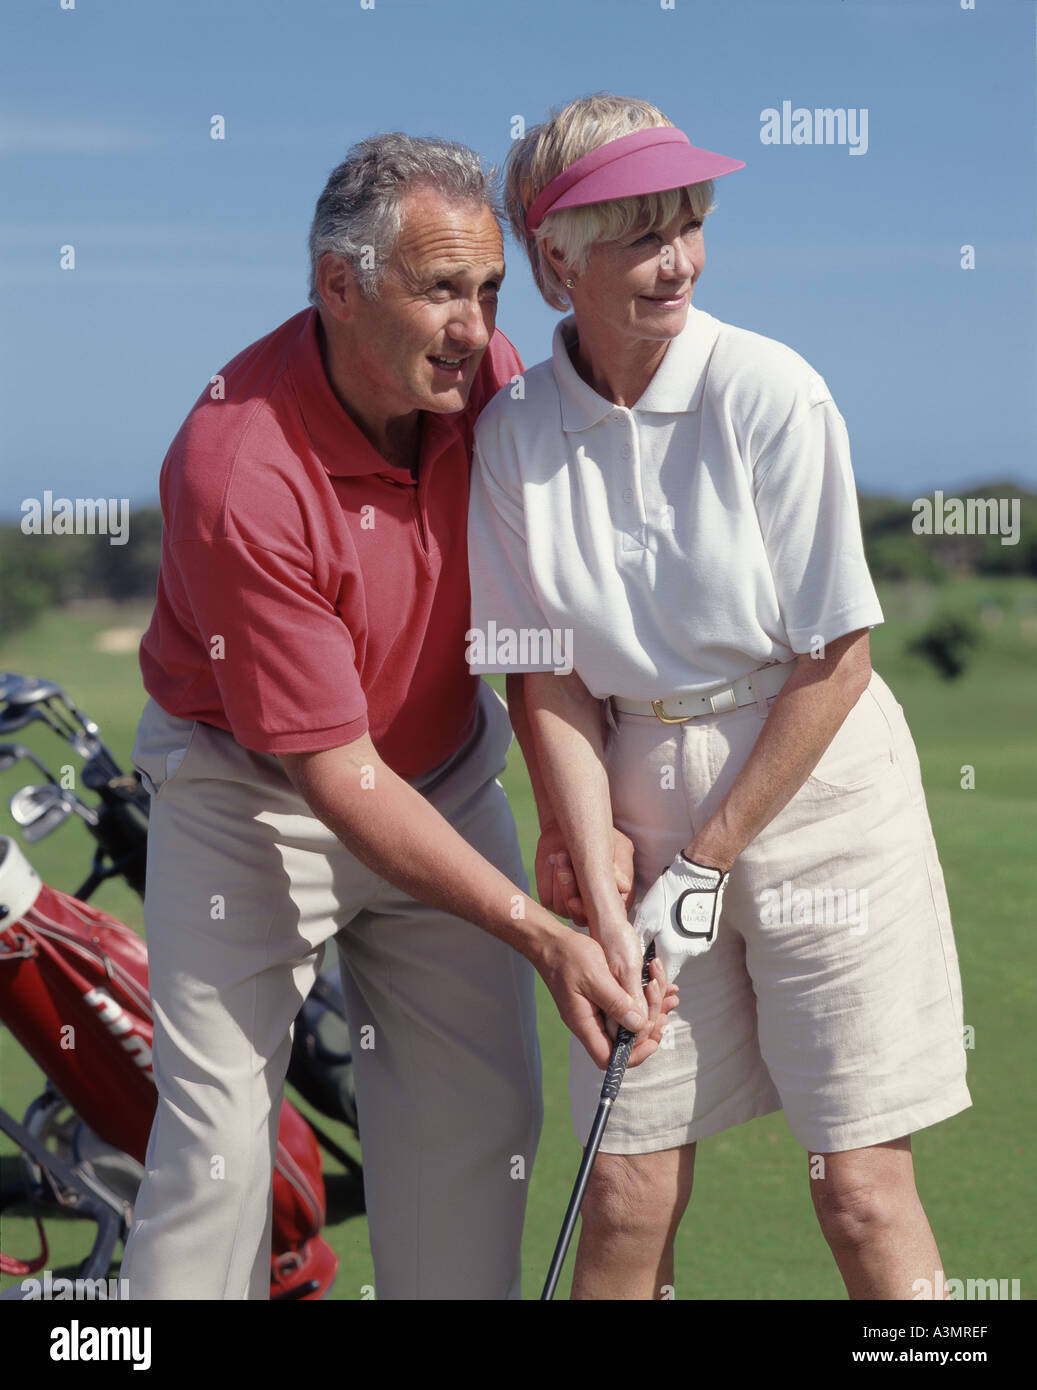 retired couple, with man helping woman with golf swing Stock Photo